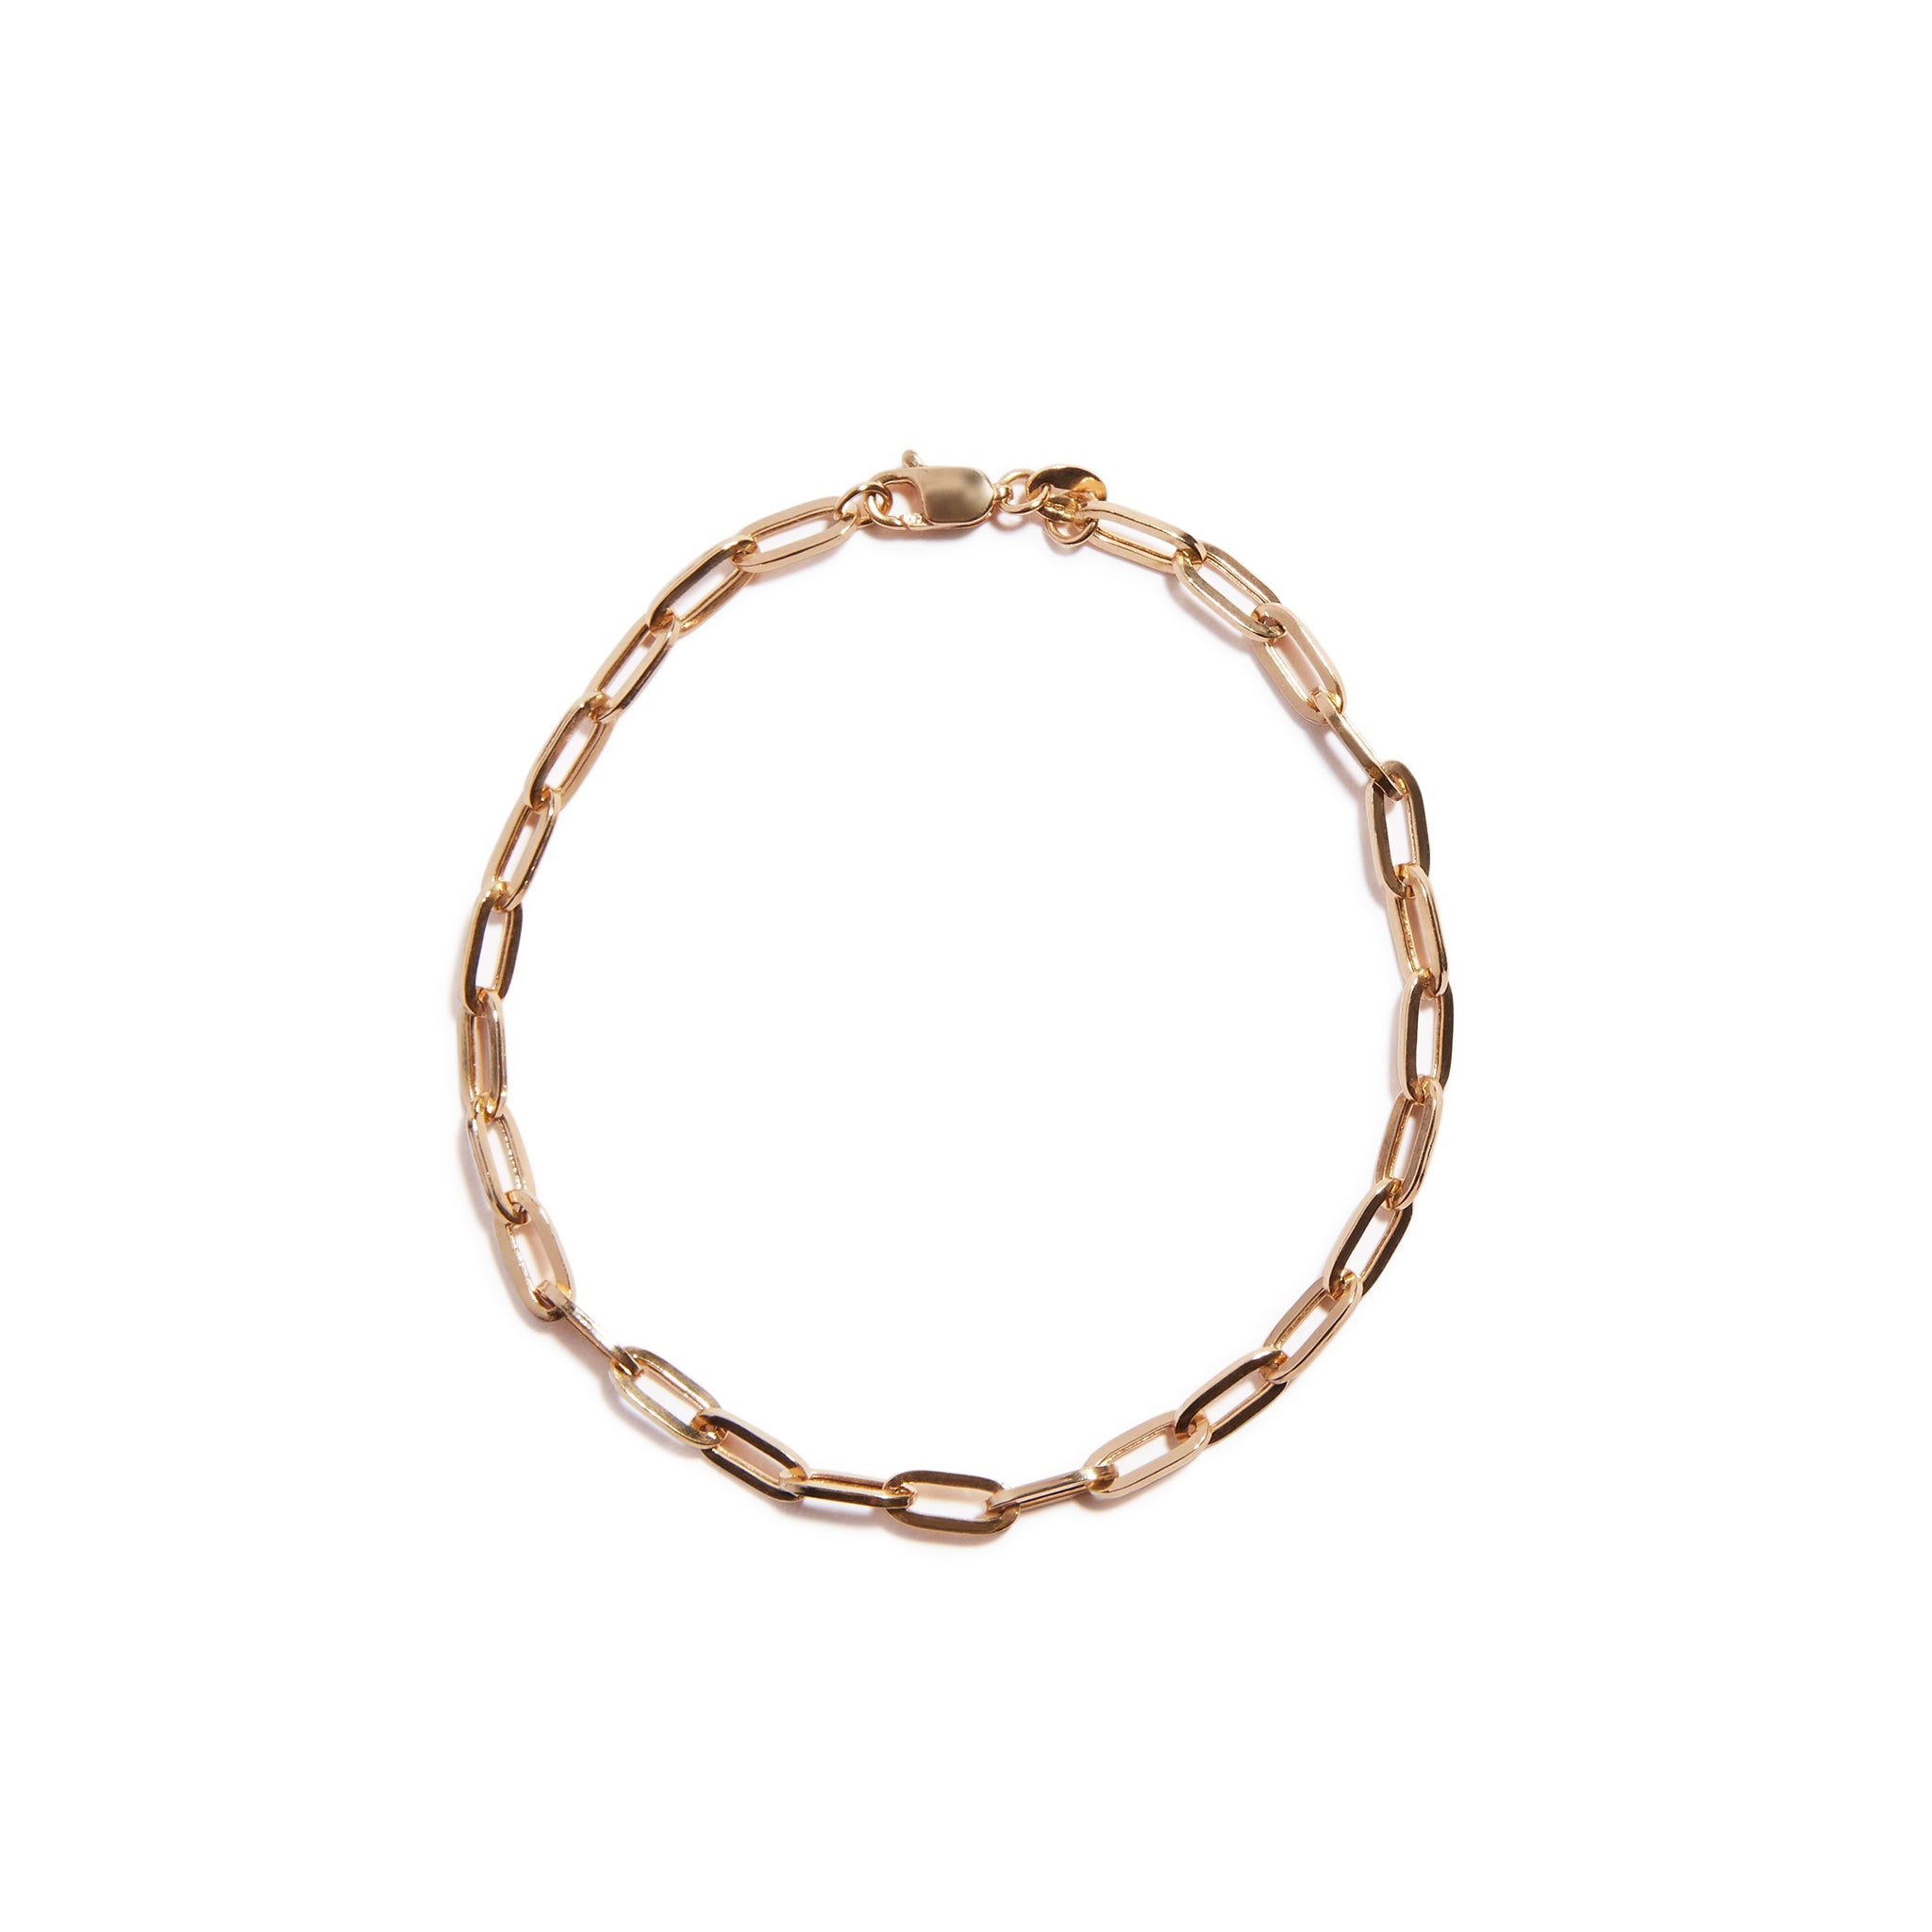 A stylish 9 carat gold bracelet featuring a trendy paper chain design, perfect for adding a touch of modern elegance to any outfit.